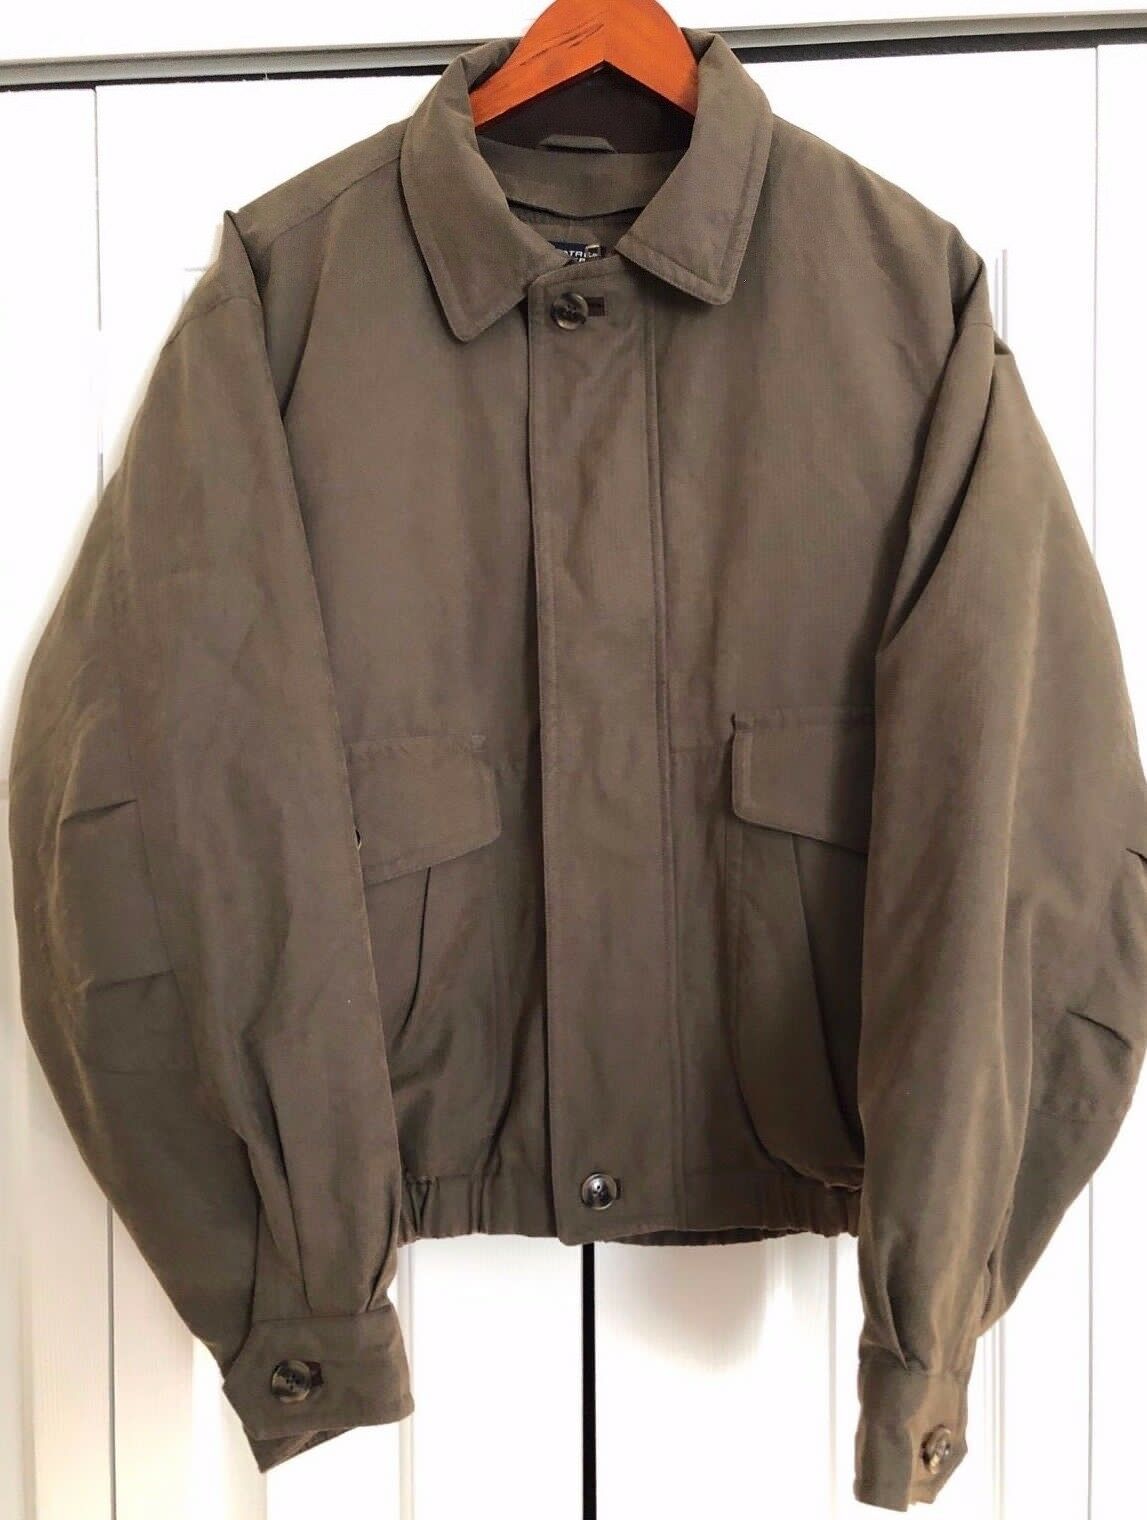 Roundtree & Yorke Outdoors Jacket Coat W/Removable Thermolite Lining ...